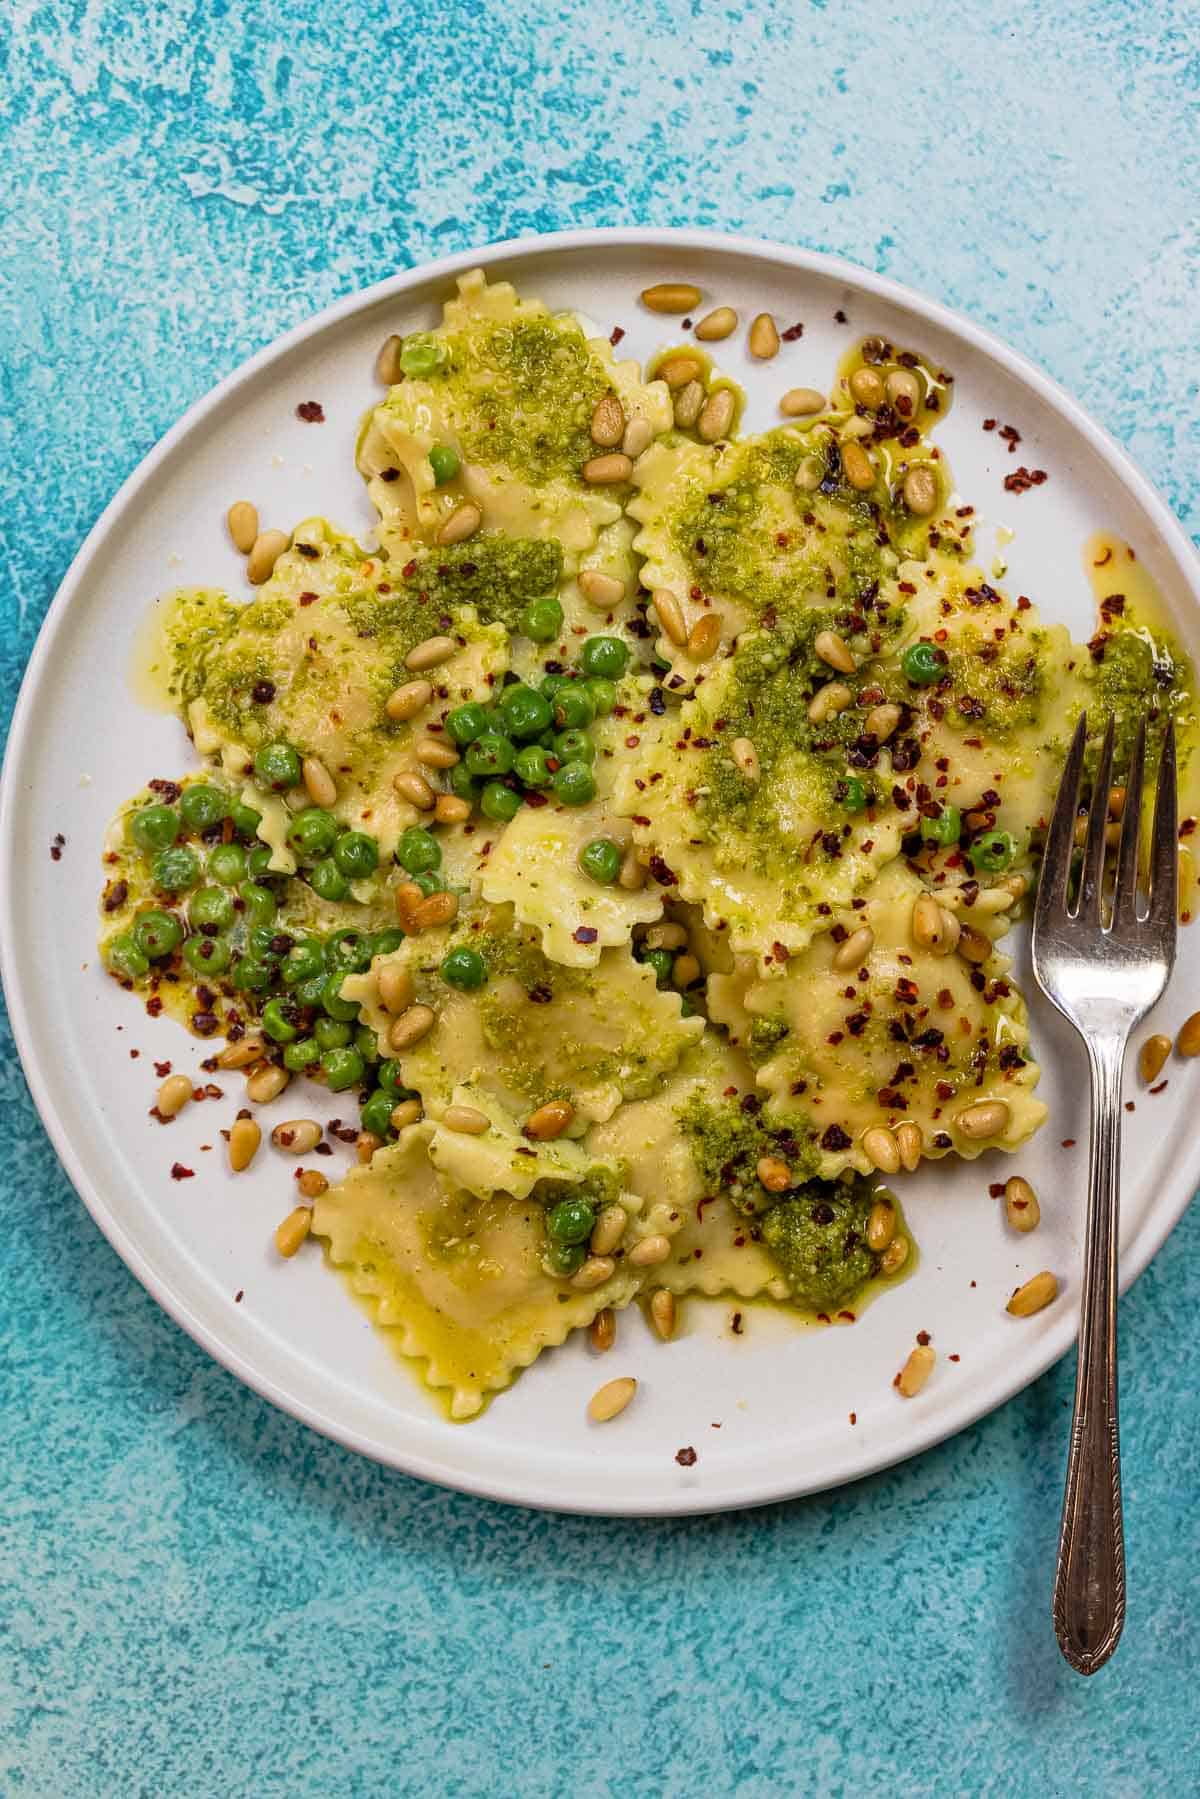 pesto ravioli recipe with peas, toasted pine nuts, and Aleppo pepper flakes on a plate with a fork.